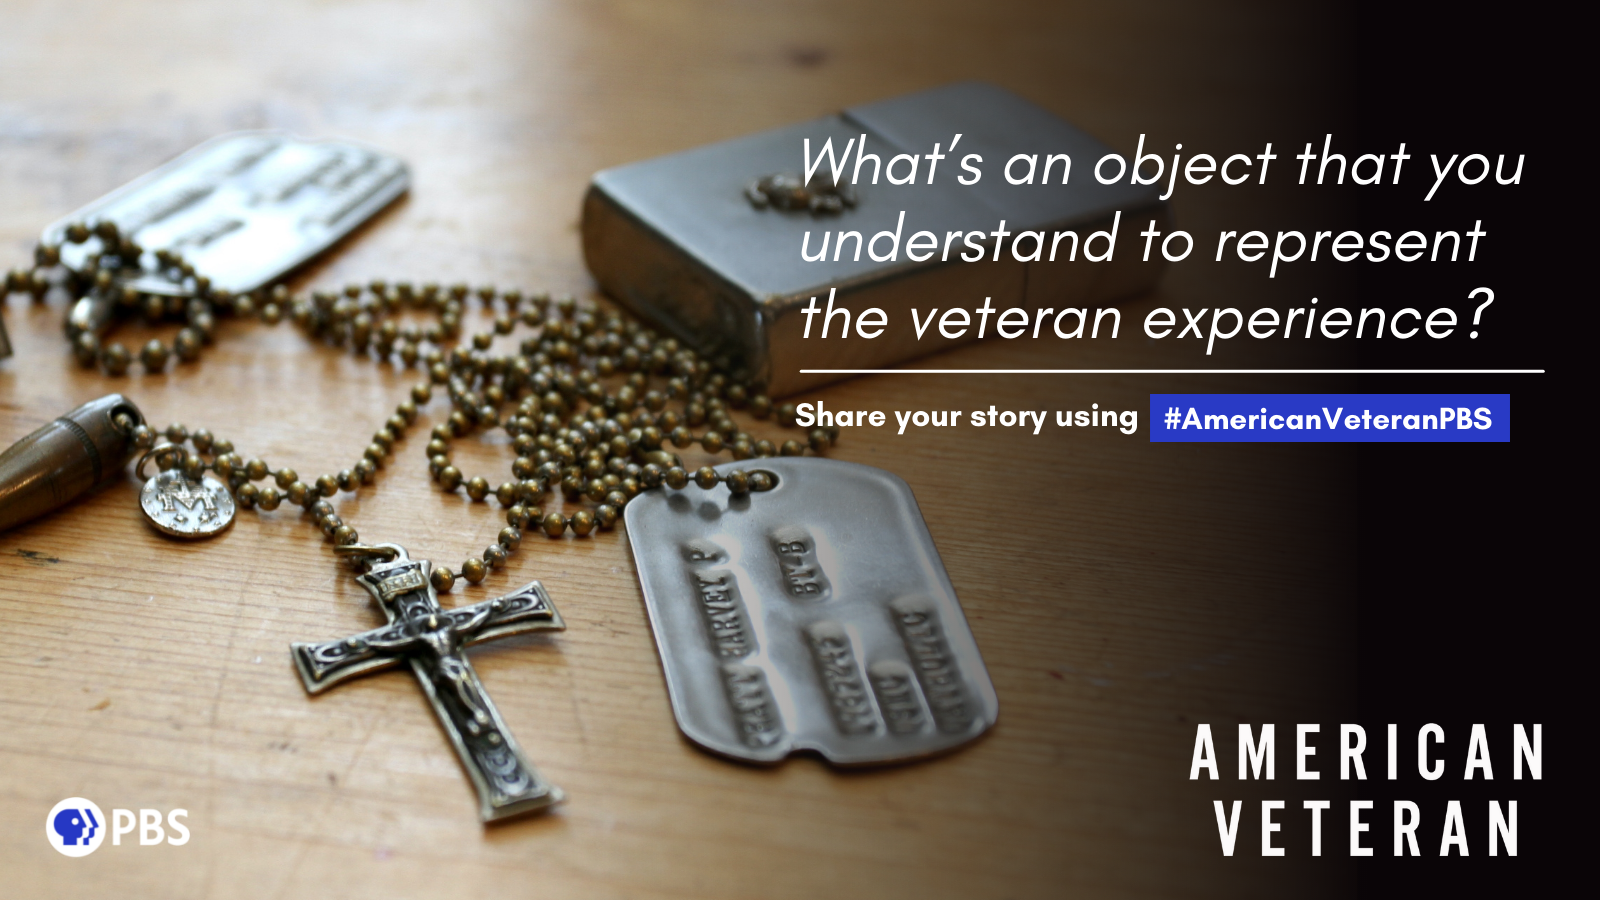 Civilian Object Graphic - Dog Tag and Cross on table